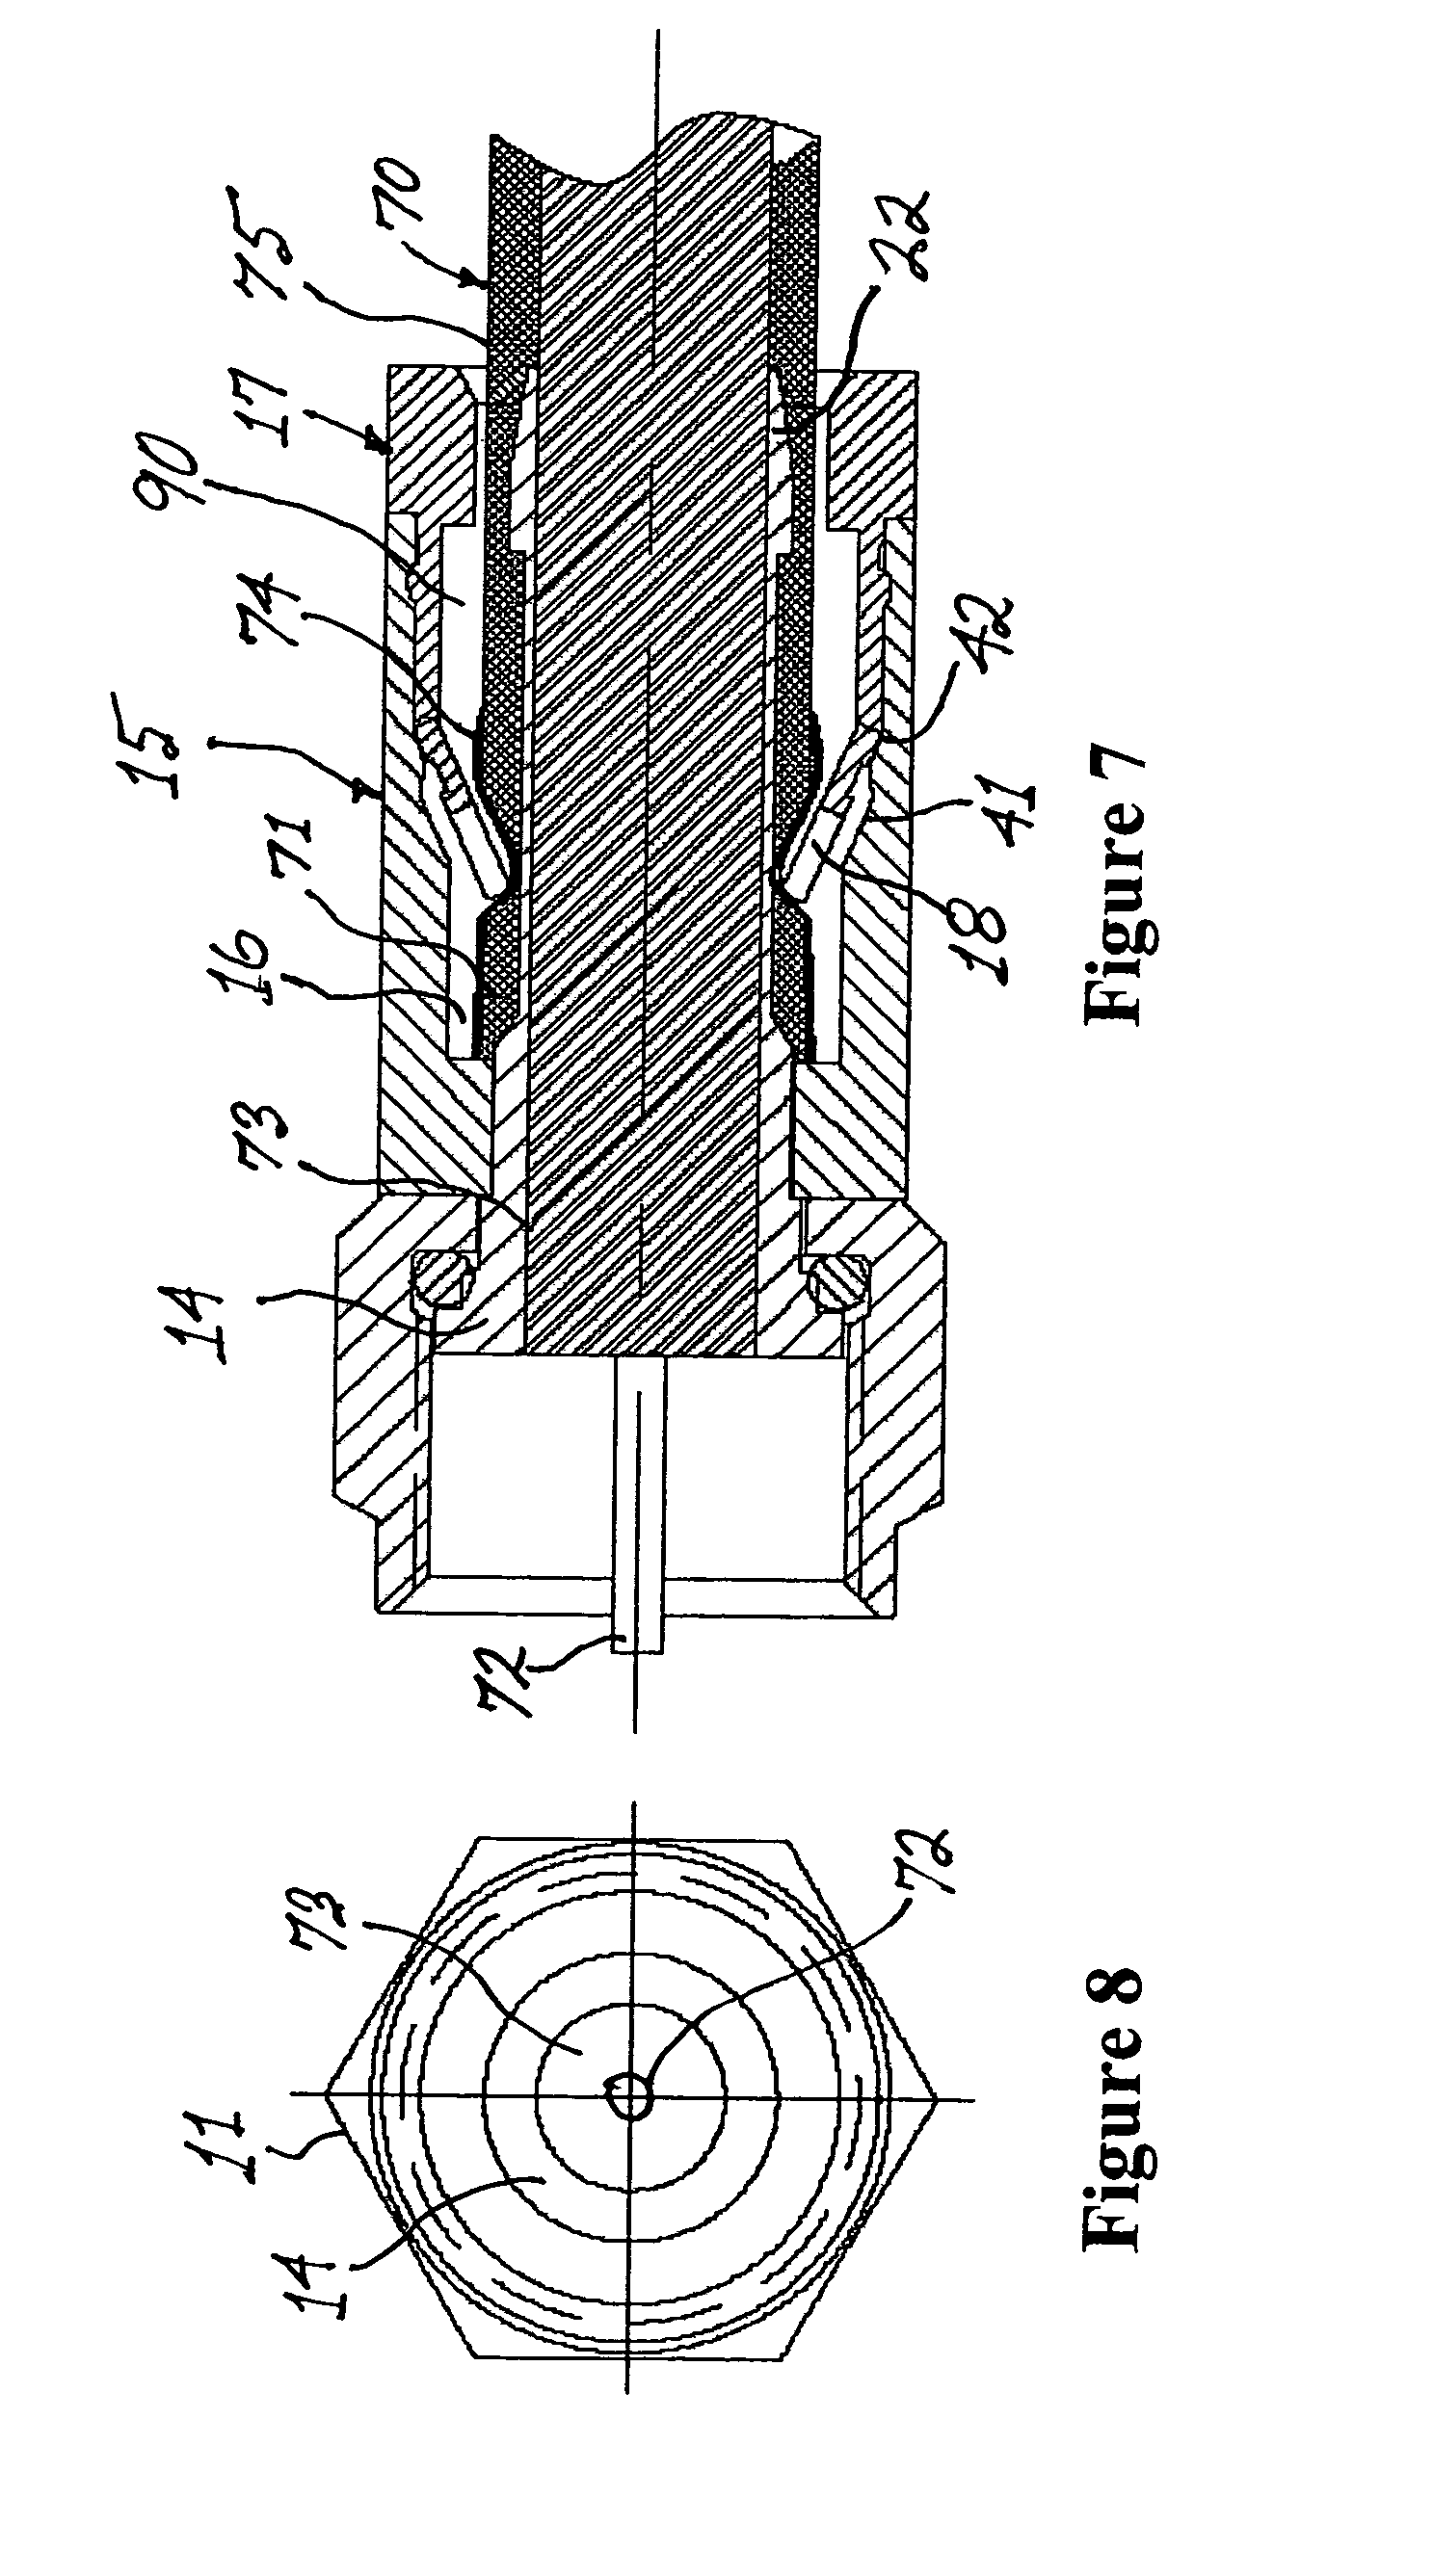 Coaxial cable connector with deformable compression sleeve